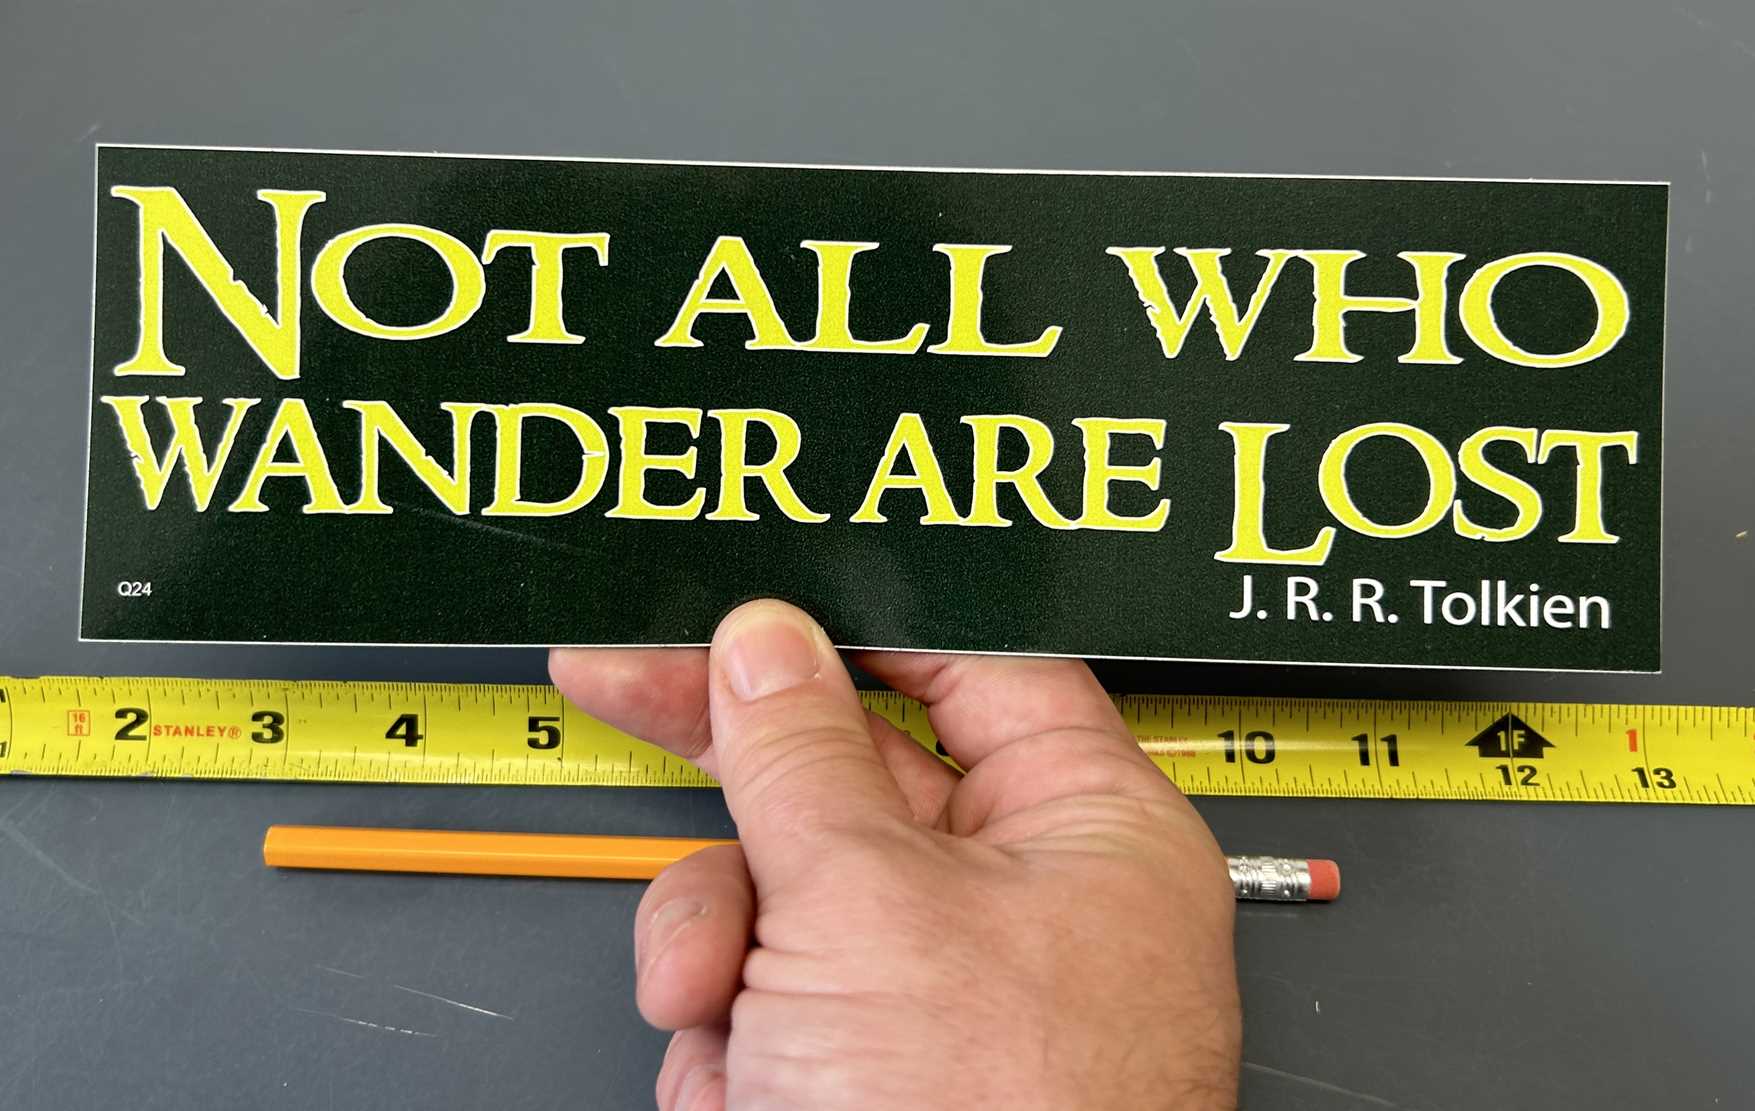 NOT ALL WHO WANDER ARE LOST - J.R.R. TOLKIEN  CAR MAGNET IN HAND